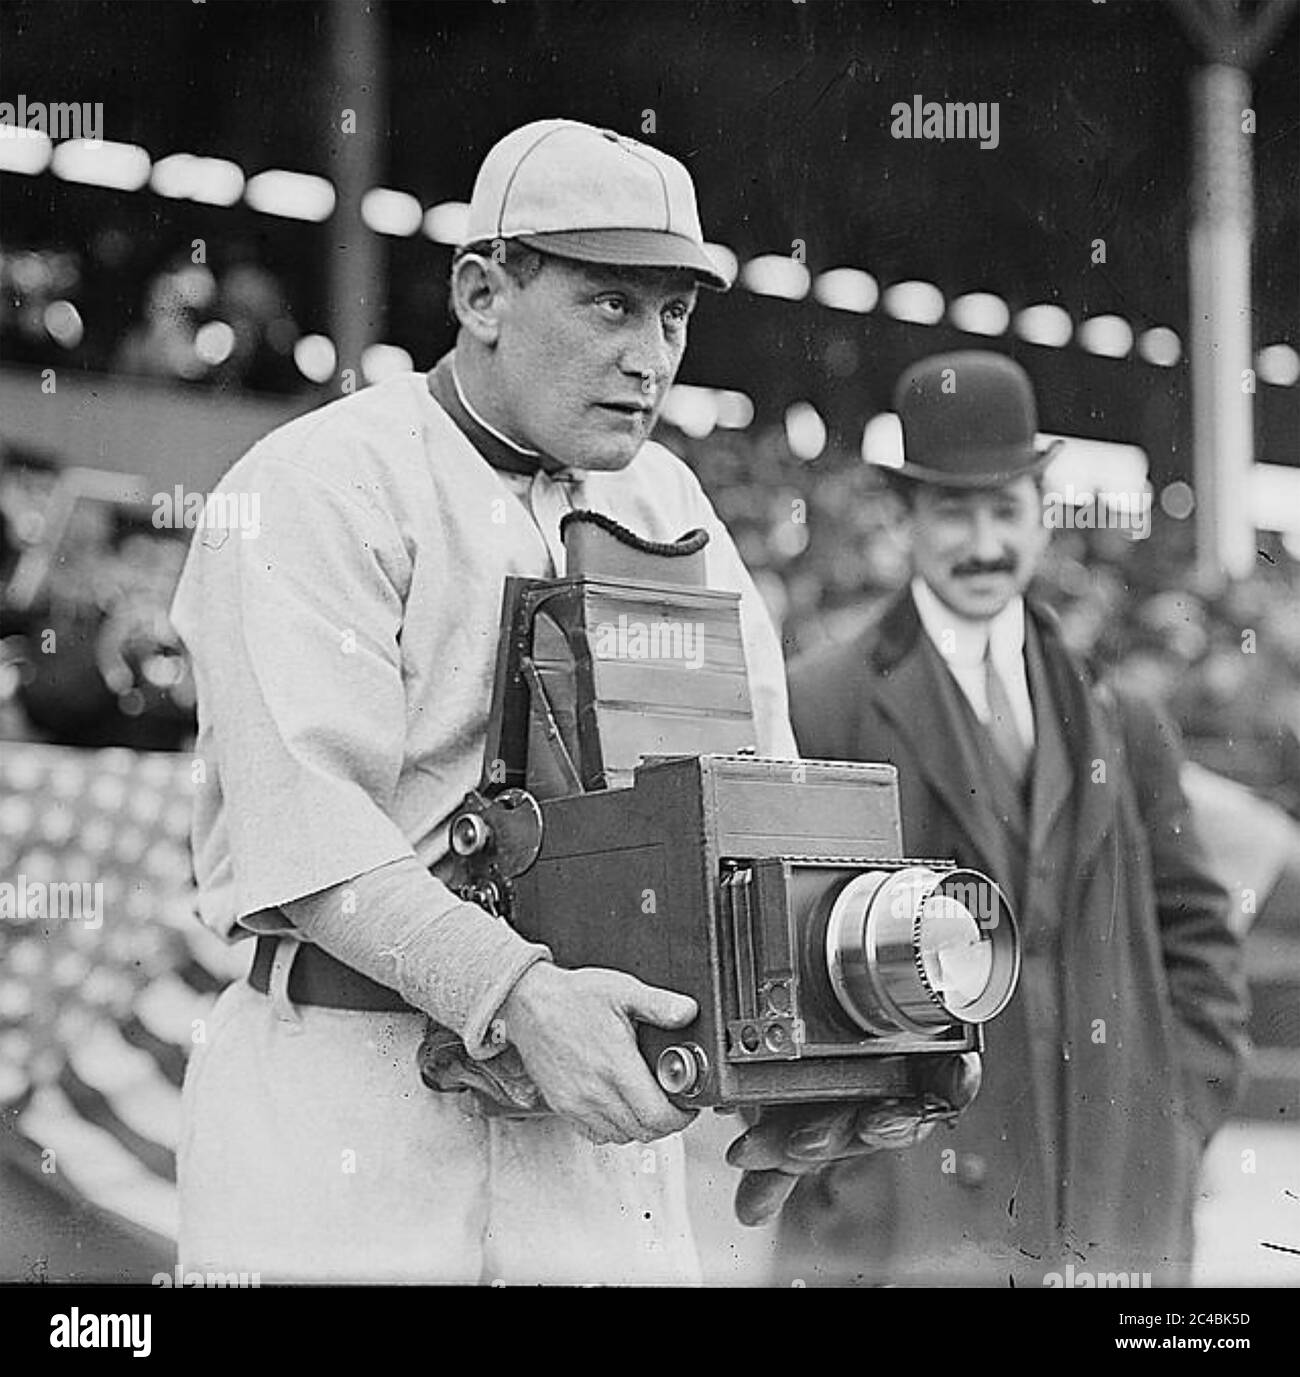 TELEPHOTO LENS An American baseball player tries his hand at photography about 1930 Stock Photo